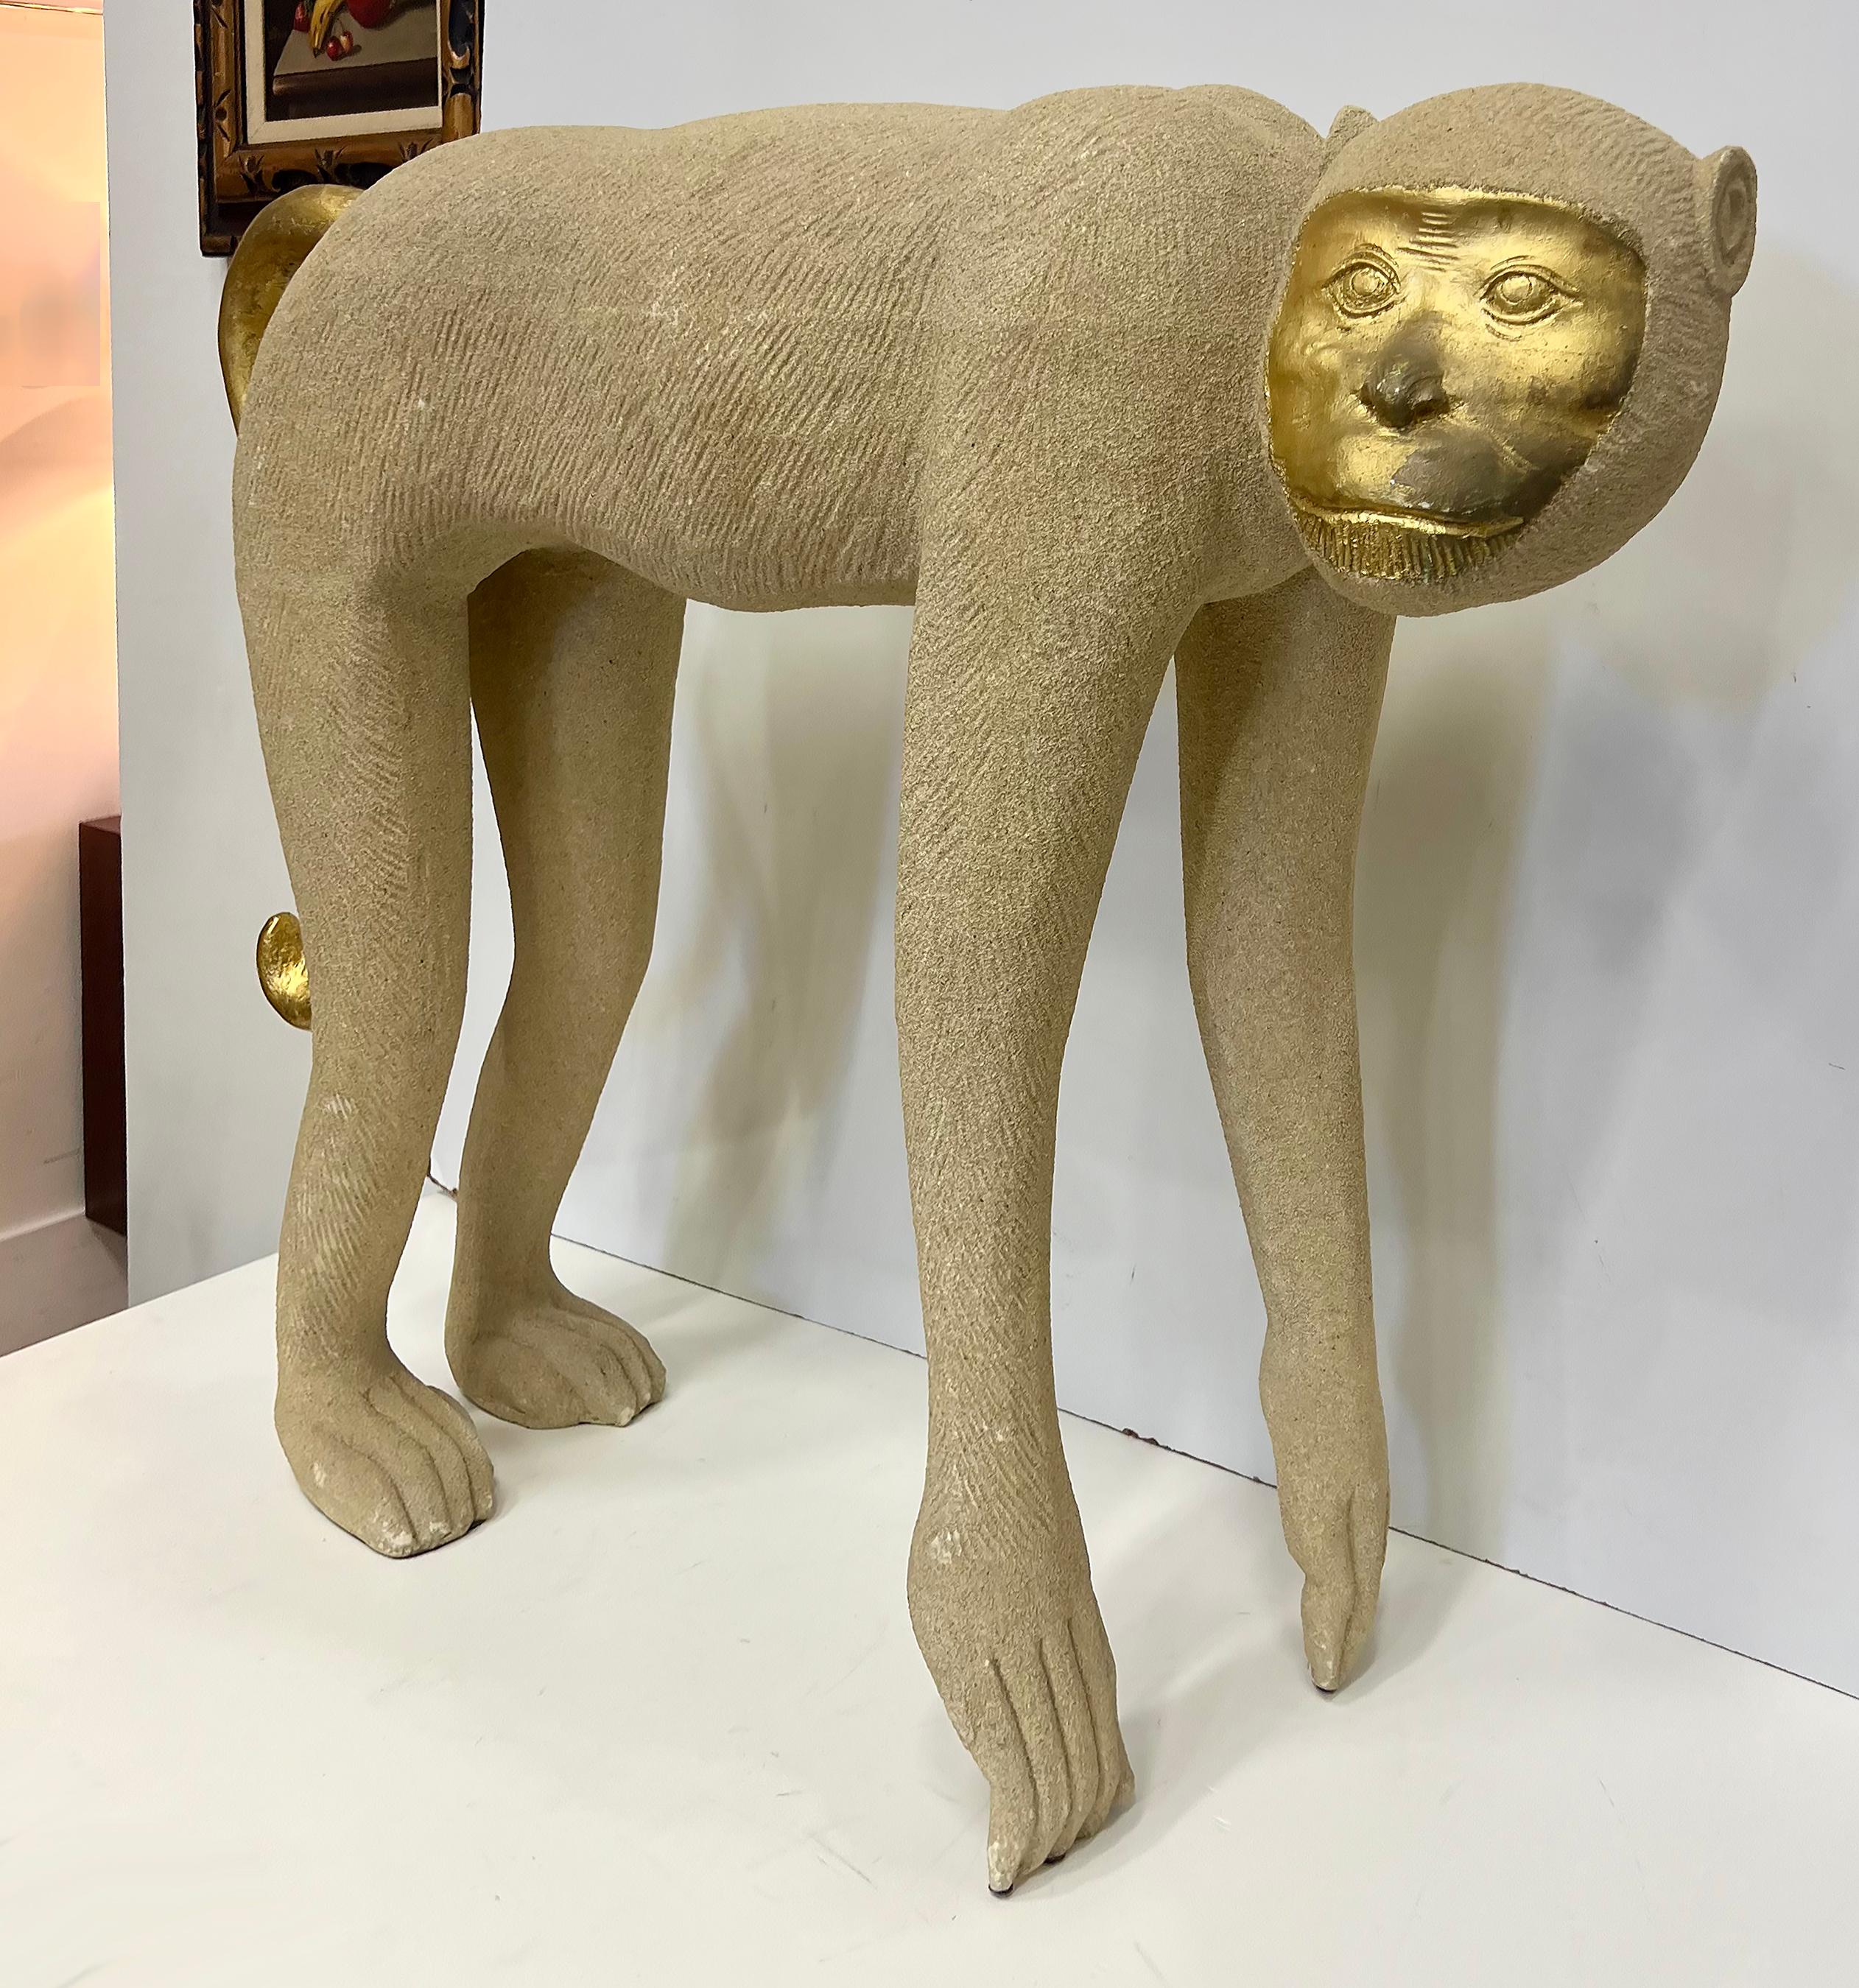 Life Size 1980s Pop-Art Monkey Sculpture With Gilt Accents In Good Condition For Sale In Miami, FL